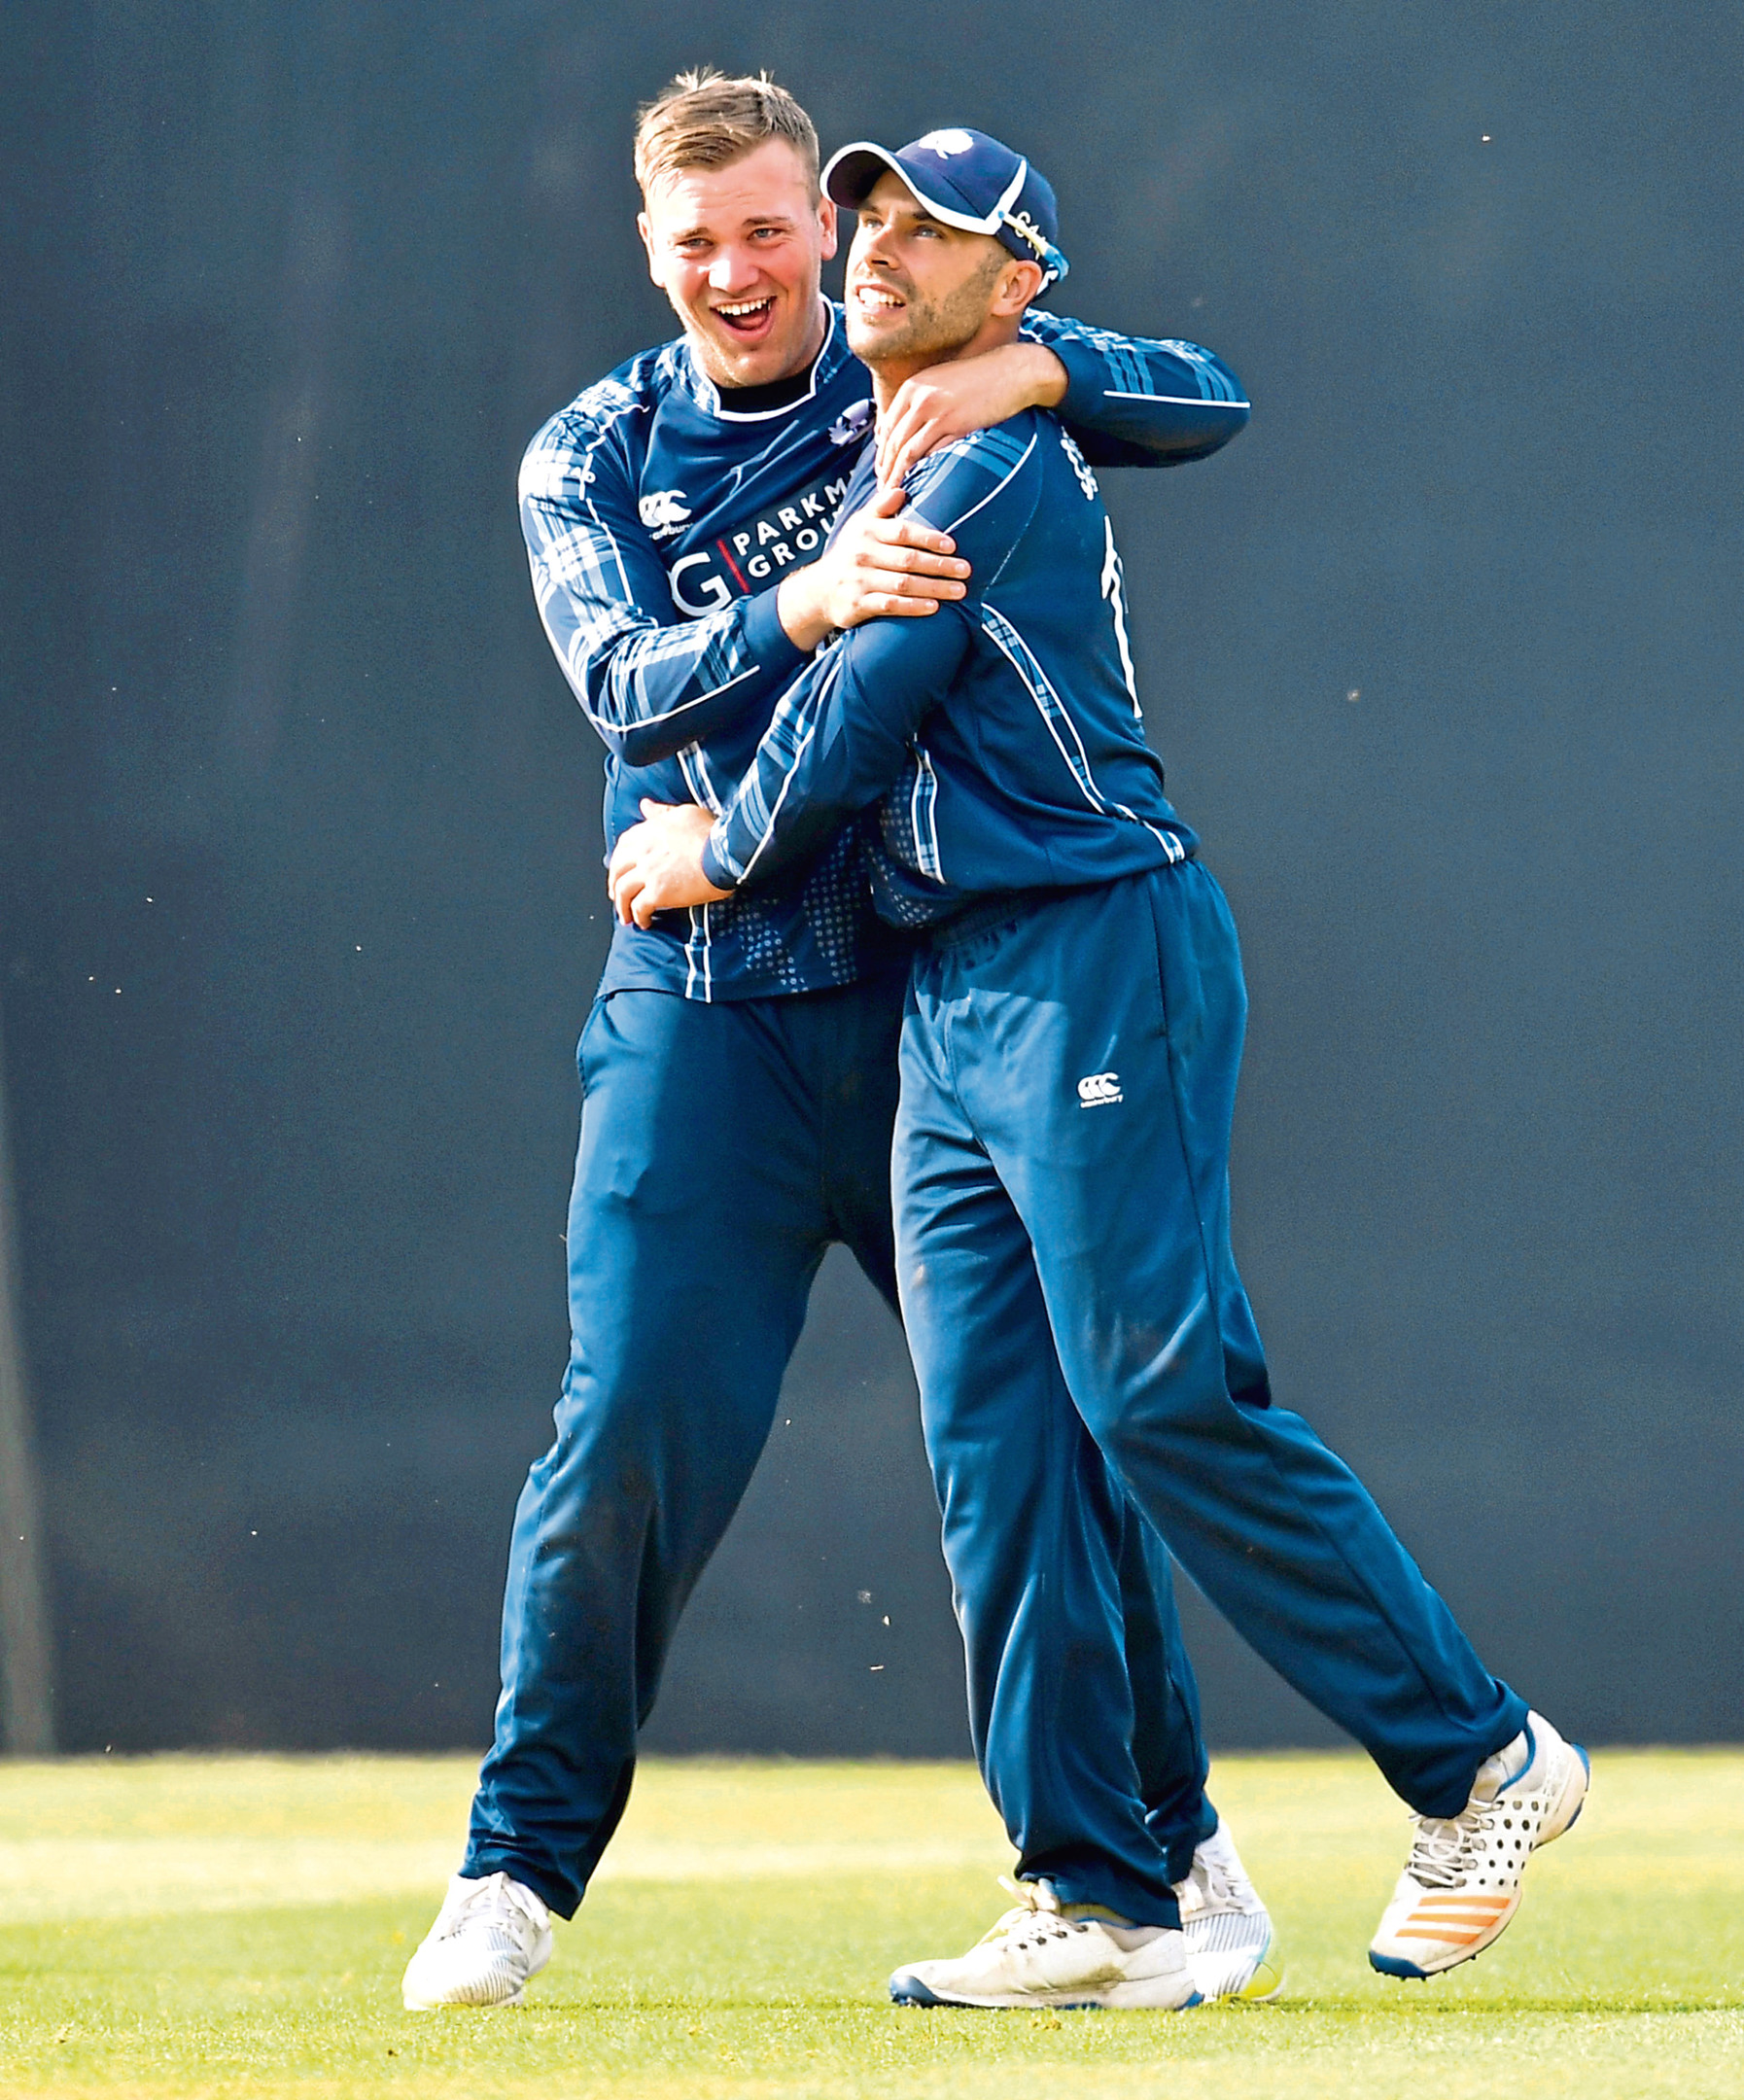 Scotland's Kyle Coetzer catches a shot from Eoin Morgan last year against England.